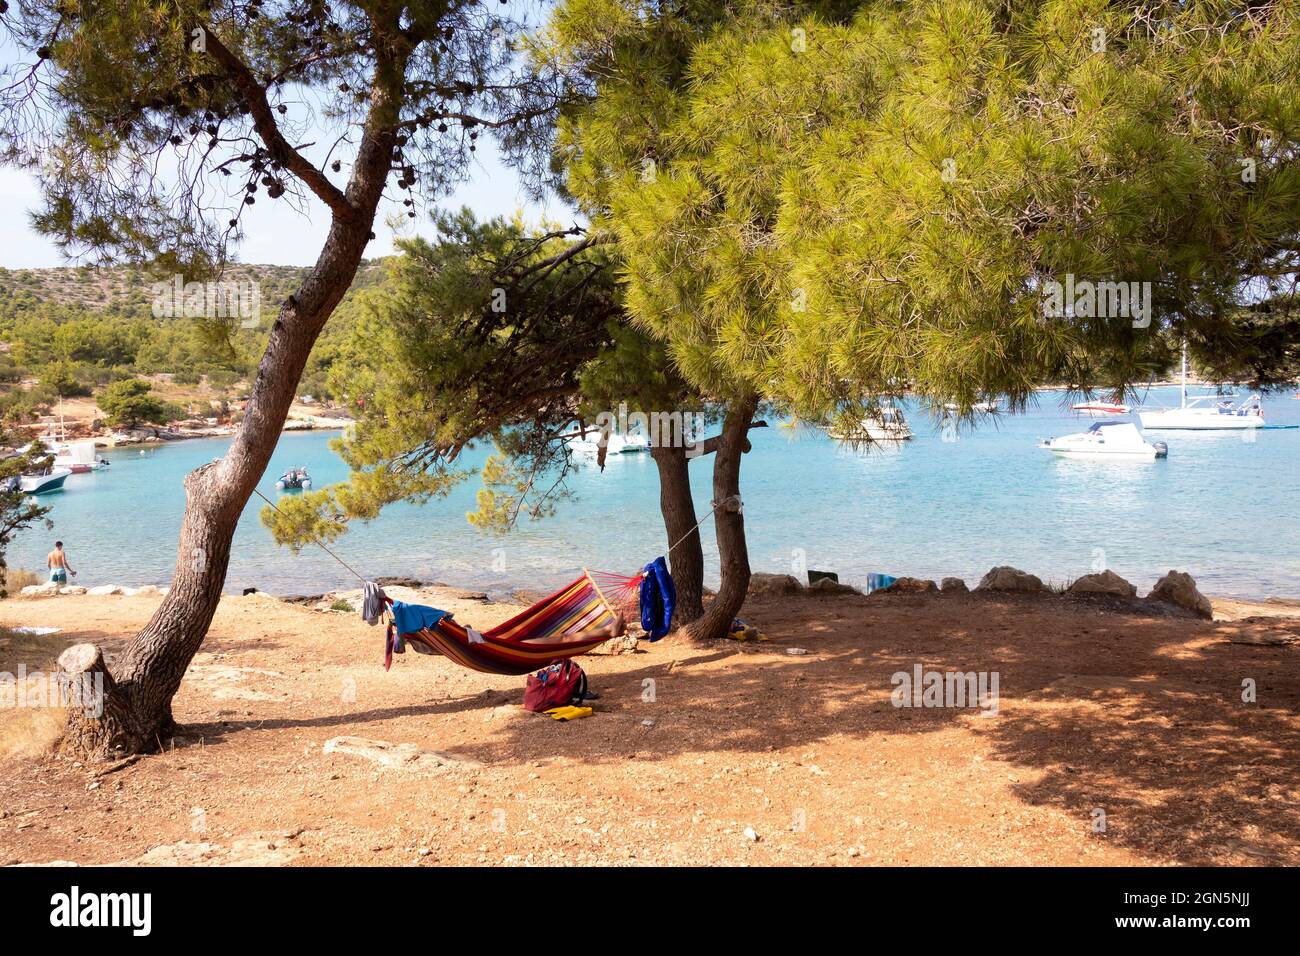 Kosirina, Murter, Croatia - August 24, 2021: Person lying in colorful hammock in the shade of pine trees on the beach and boats moored in a bay in per Stock Photo